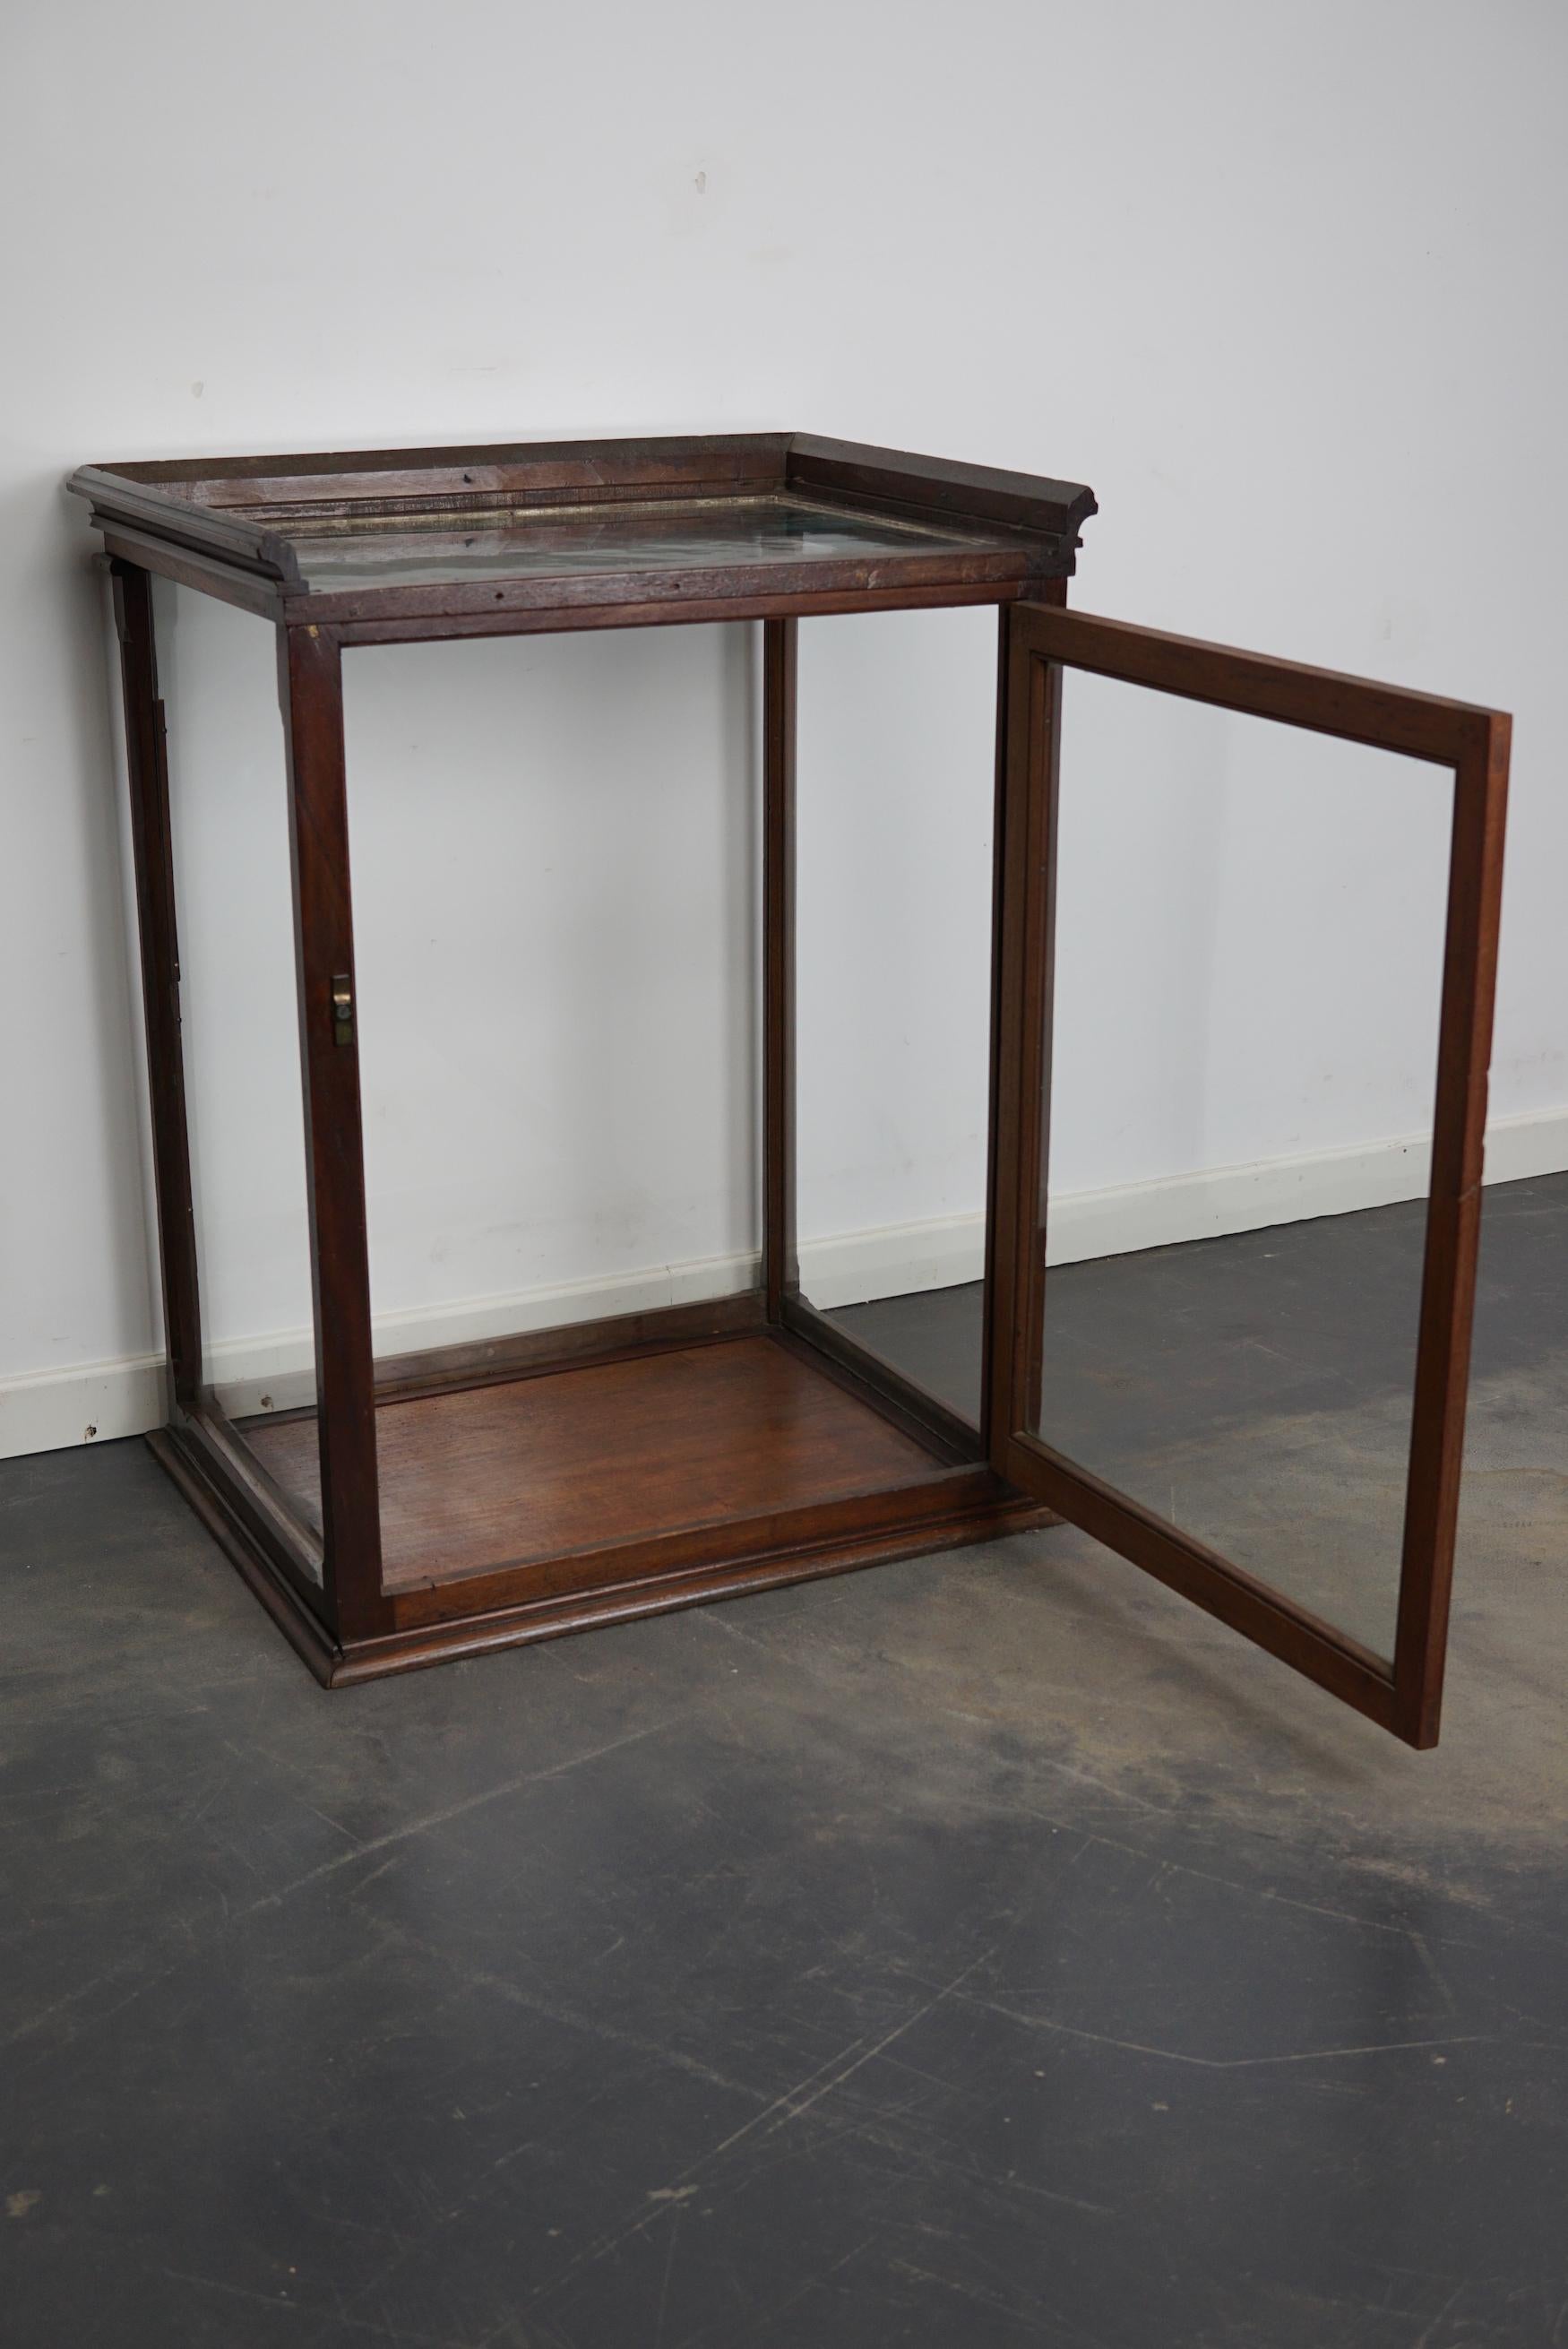 Victorian Mahogany Museum / Shop Display Cabinet or Vitrine, Late 19th Century For Sale 4